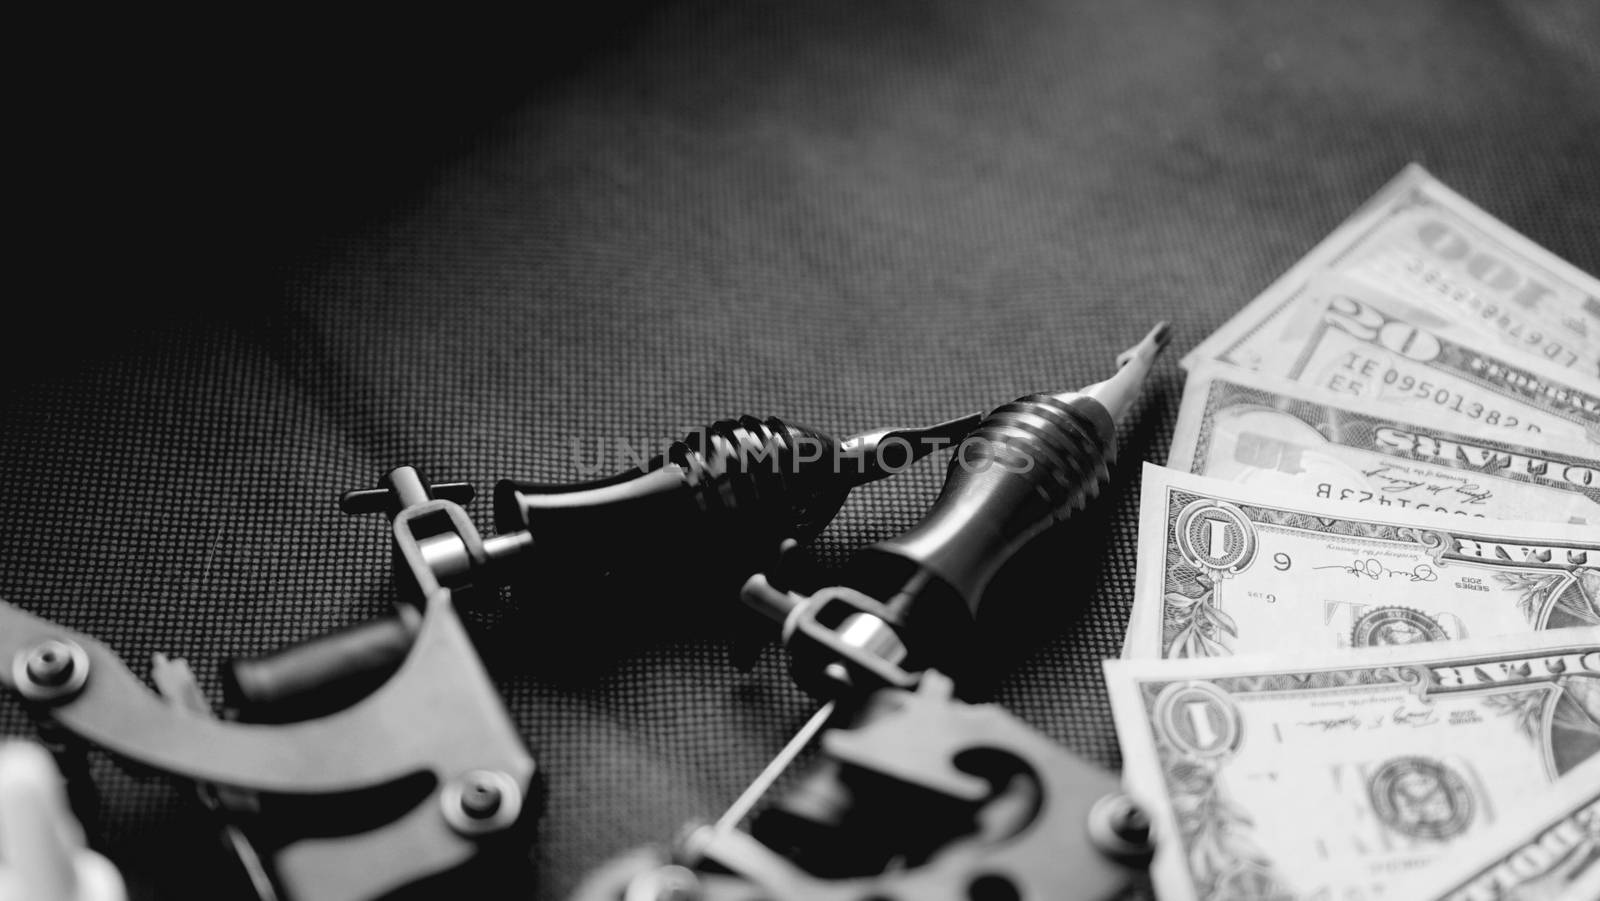 Tattoo machines on a black background and dollars. Tattoo art concept. Money for tattoo